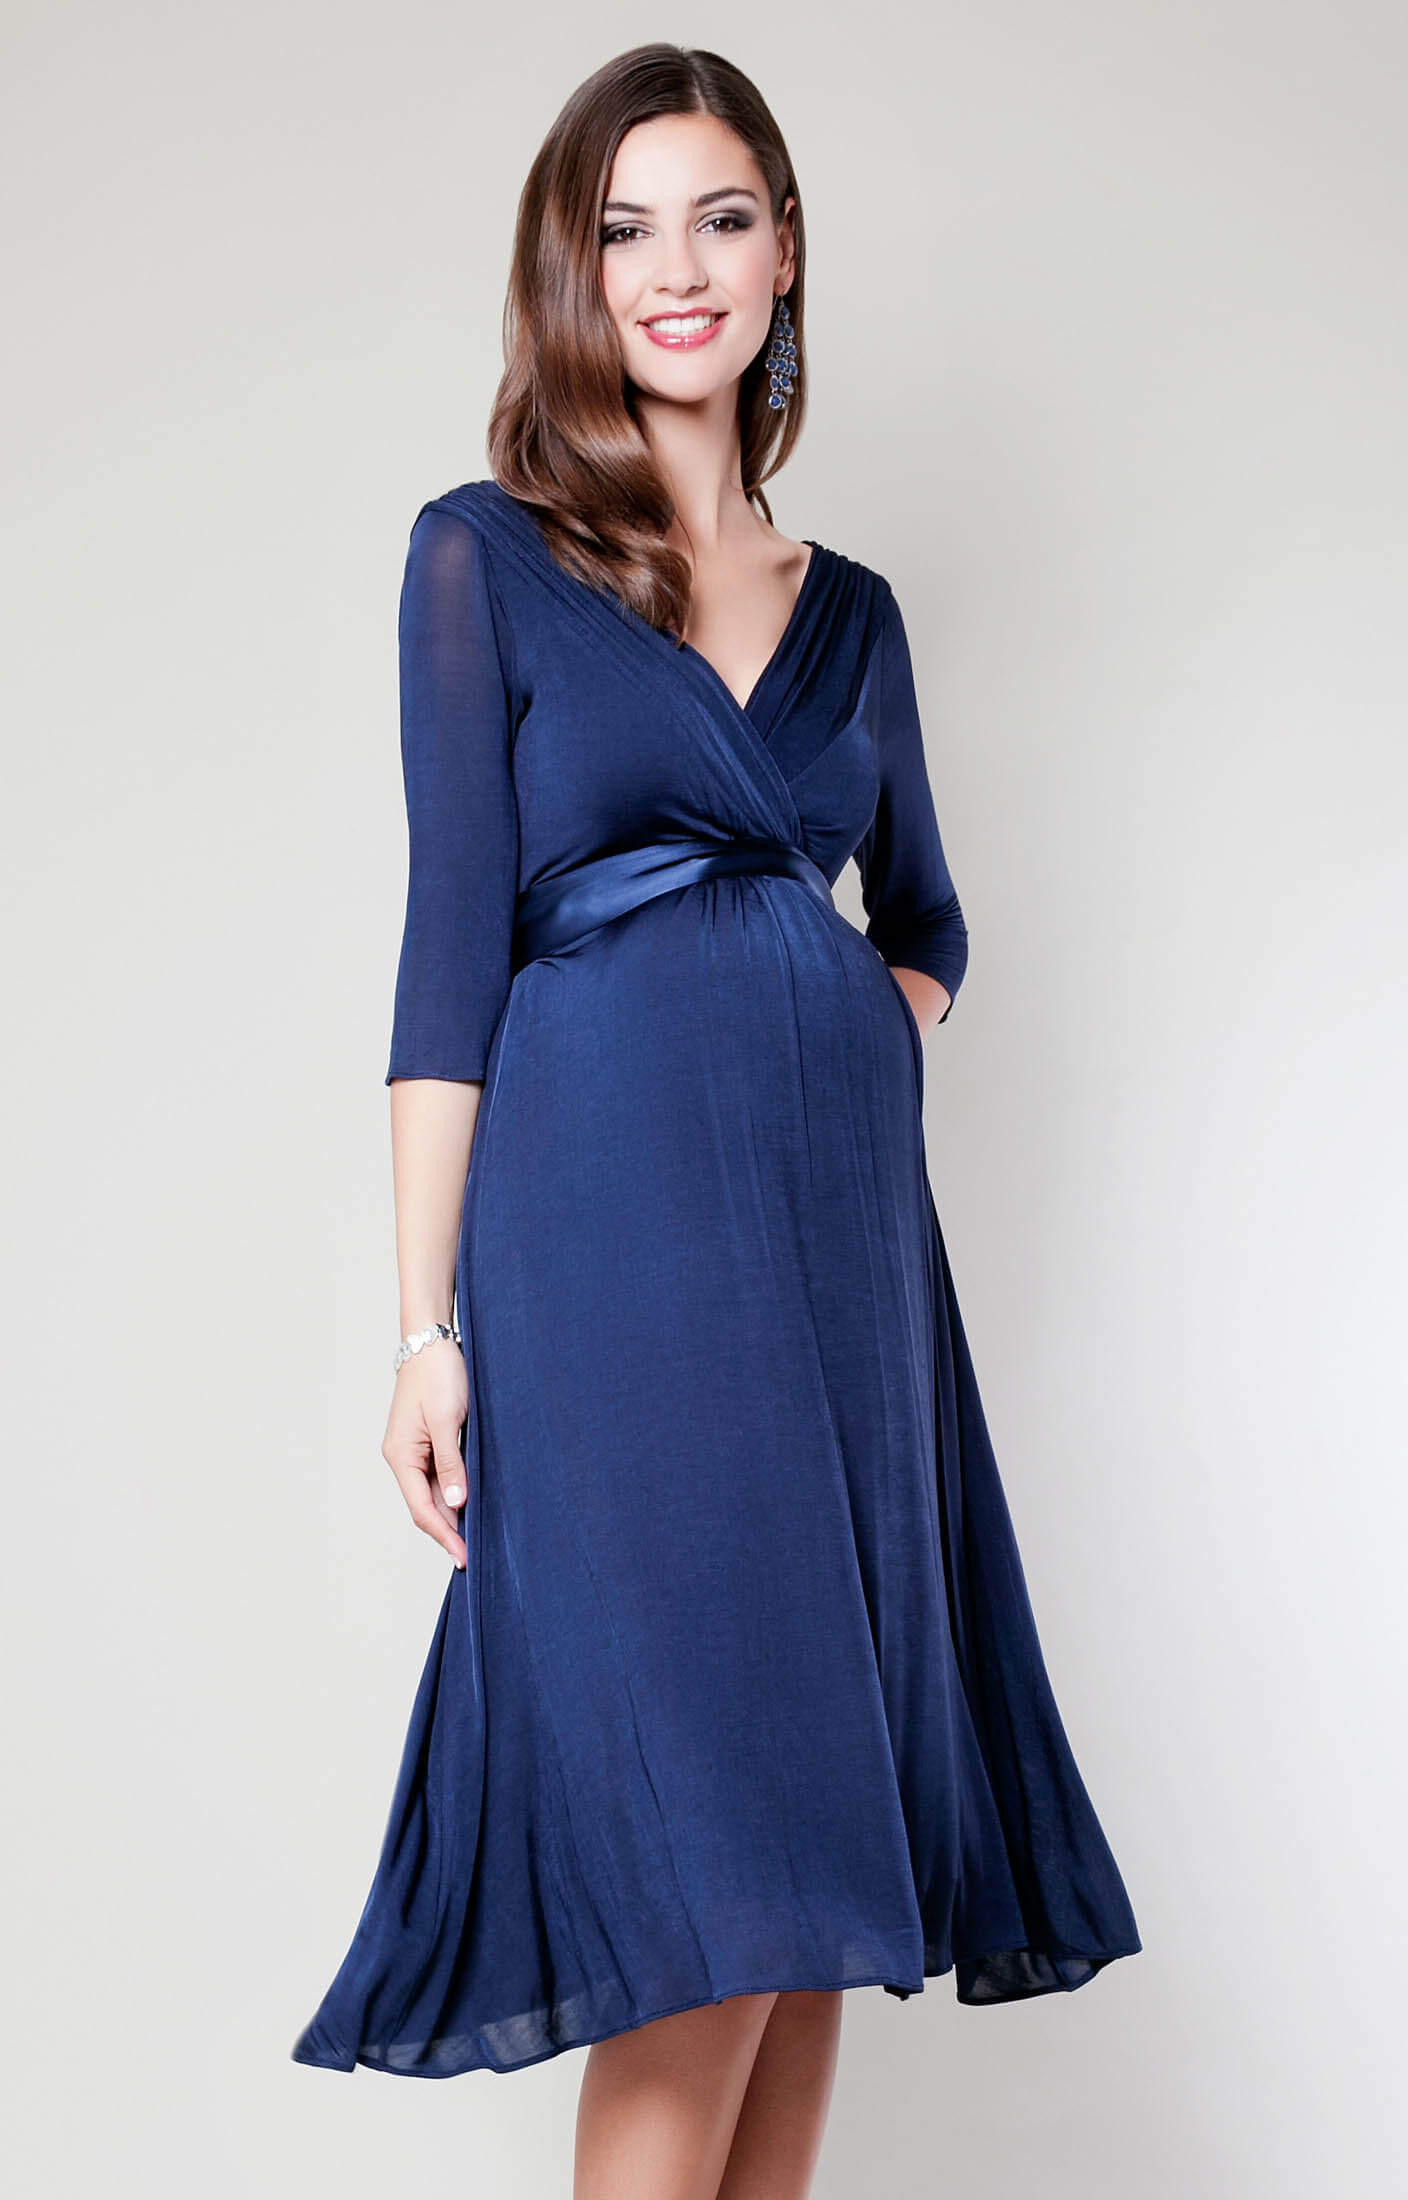 Maternity Dresses For Hire